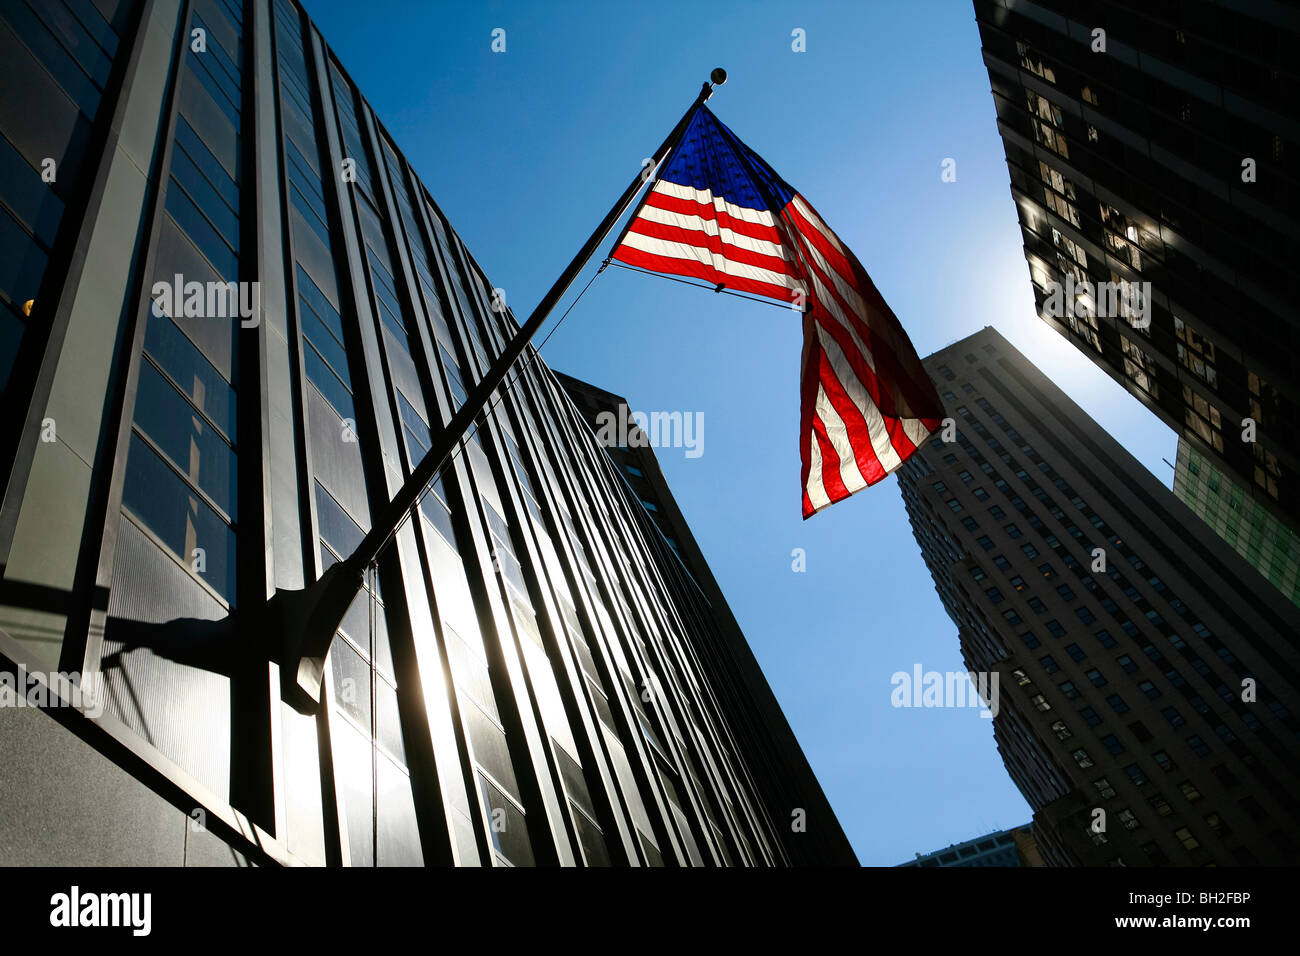 A sunny blue sky view of a steelcase building façade near the stock exchange in New York City, New York where a huge American flag is hanging. Stock Photo